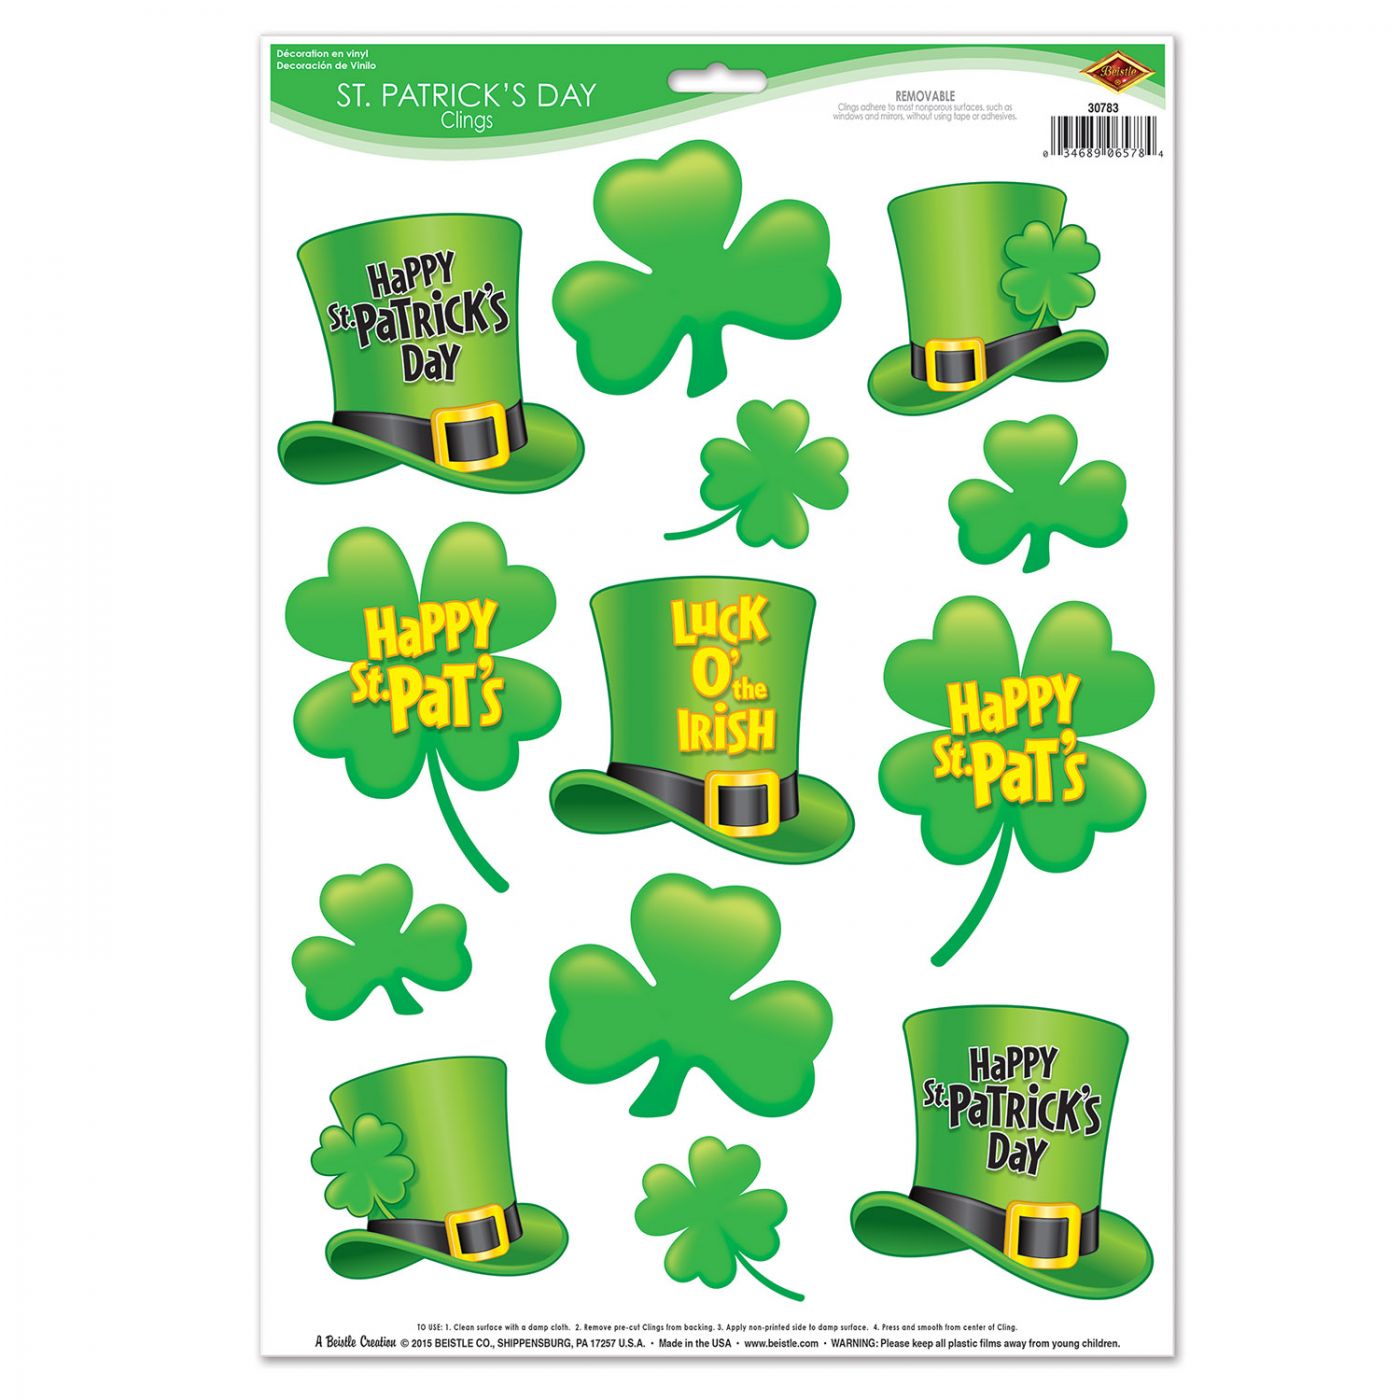 St Patrick's Day Clings image